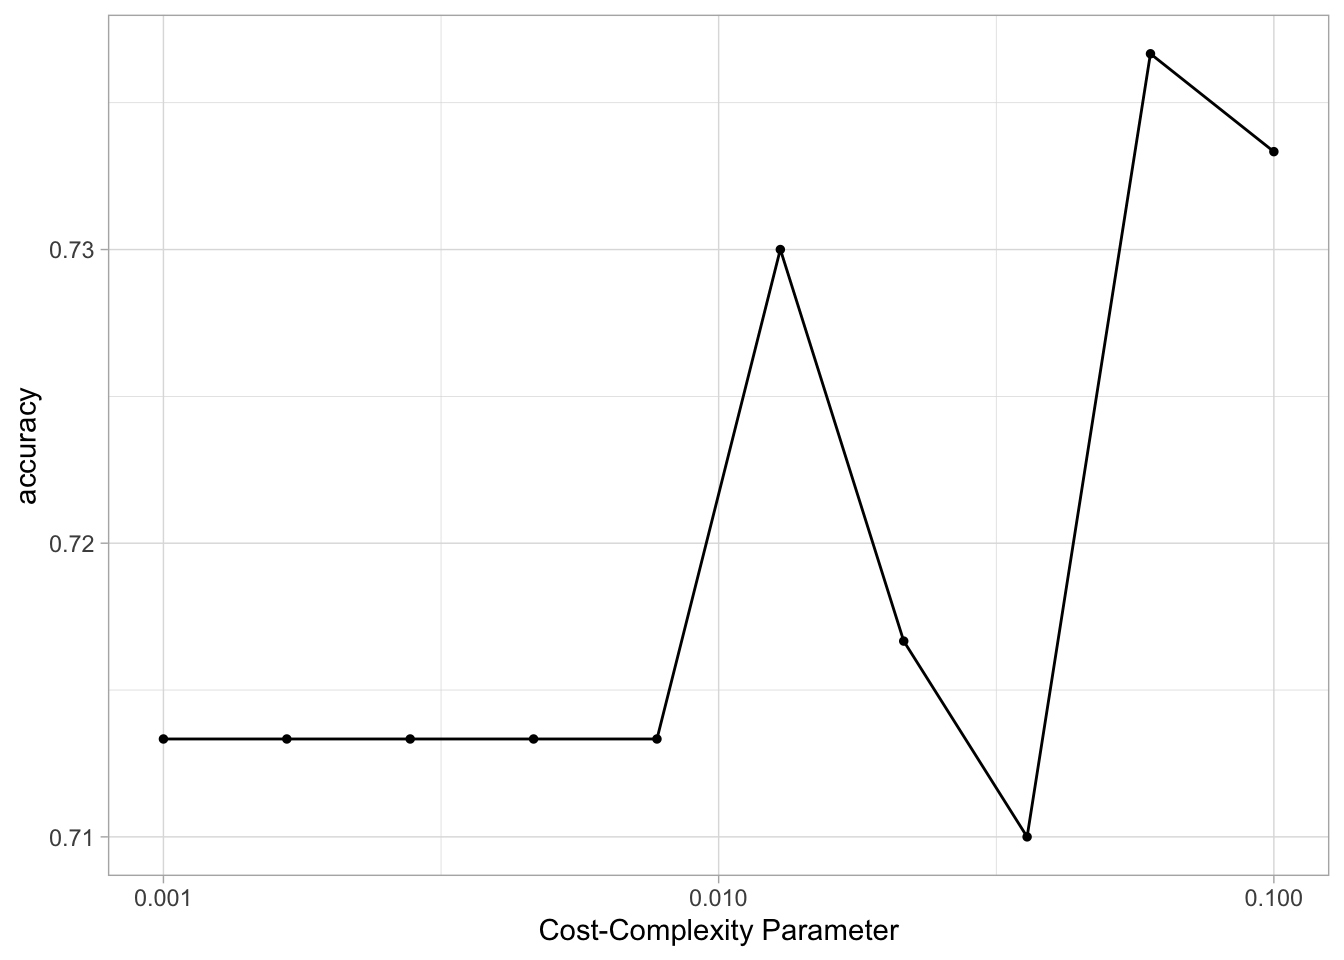 Connected scatter chart. Cost-complexity along the x-axis, accuracy along the y-axis. The accuracy stays constant for low values of cost-complexity. When cost-complexity is larger than 0.01 the accuracy shoots up and down rapidly.